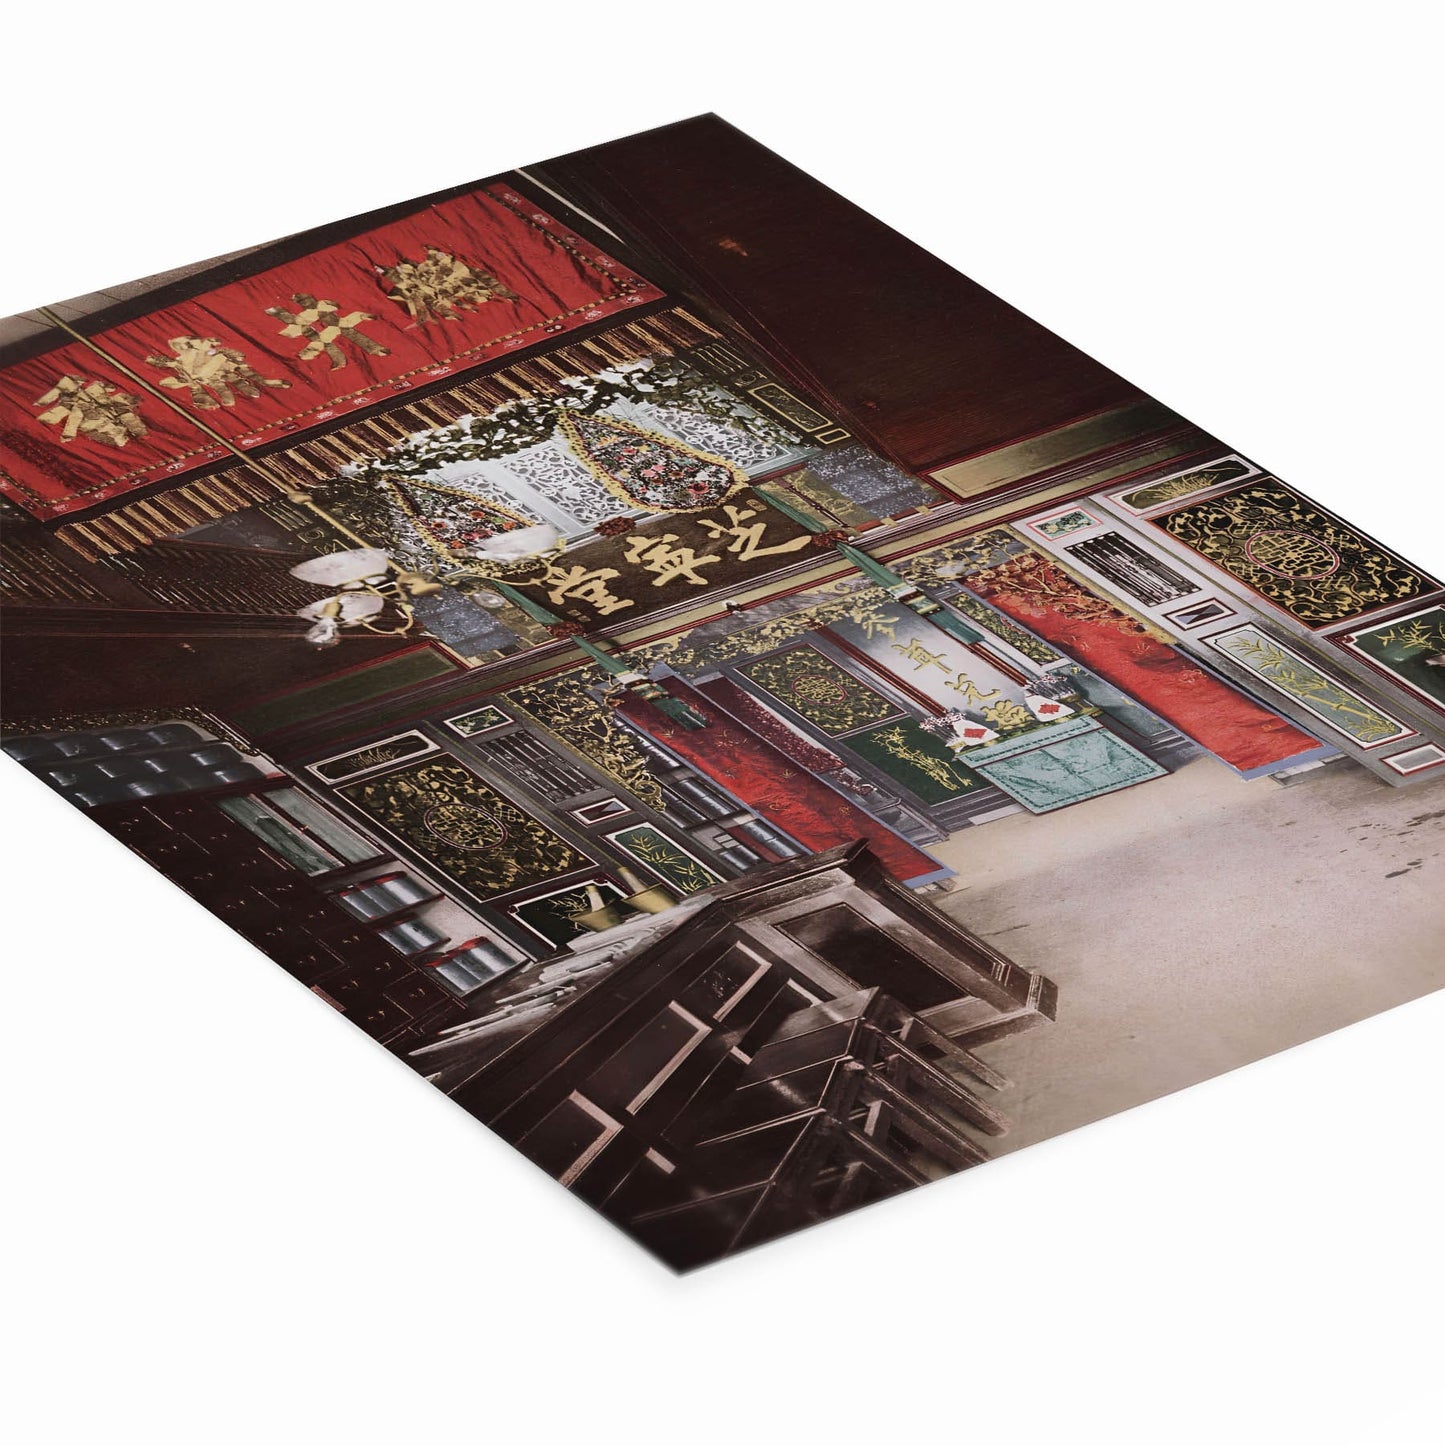 Vintage Chinese Shop Photgraph Laying Flat on a White Background